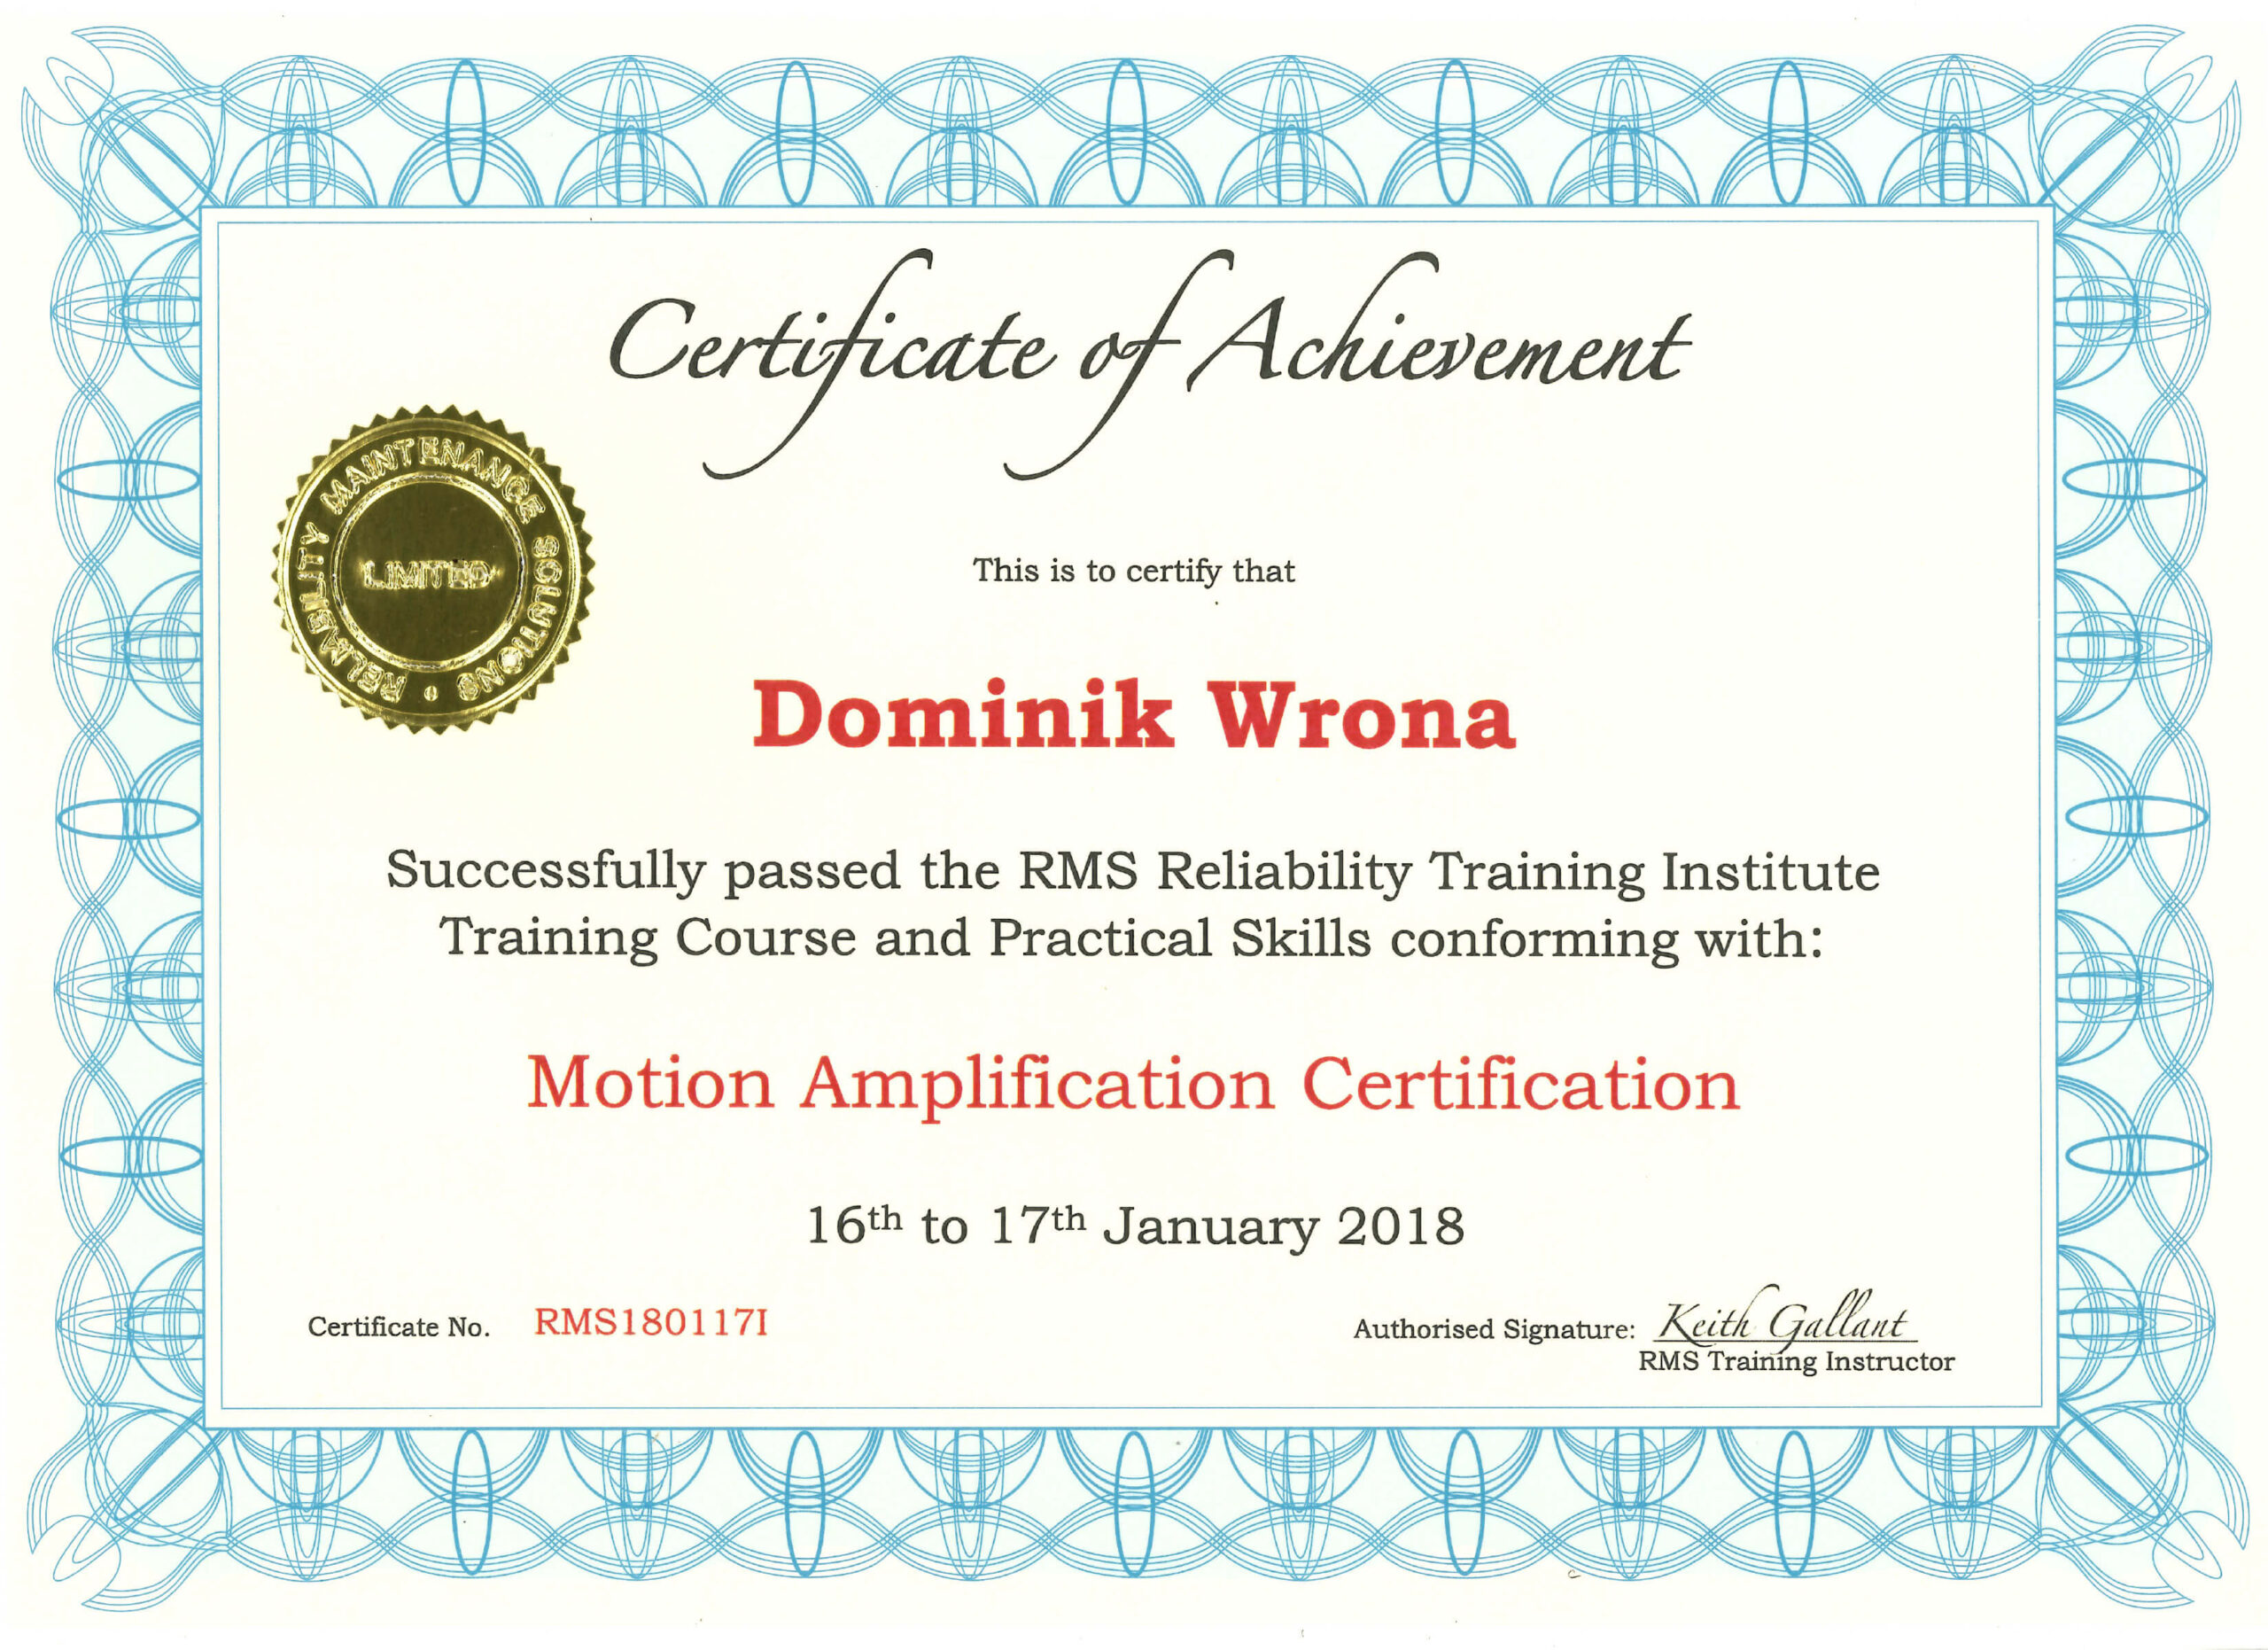 motion amplification certification